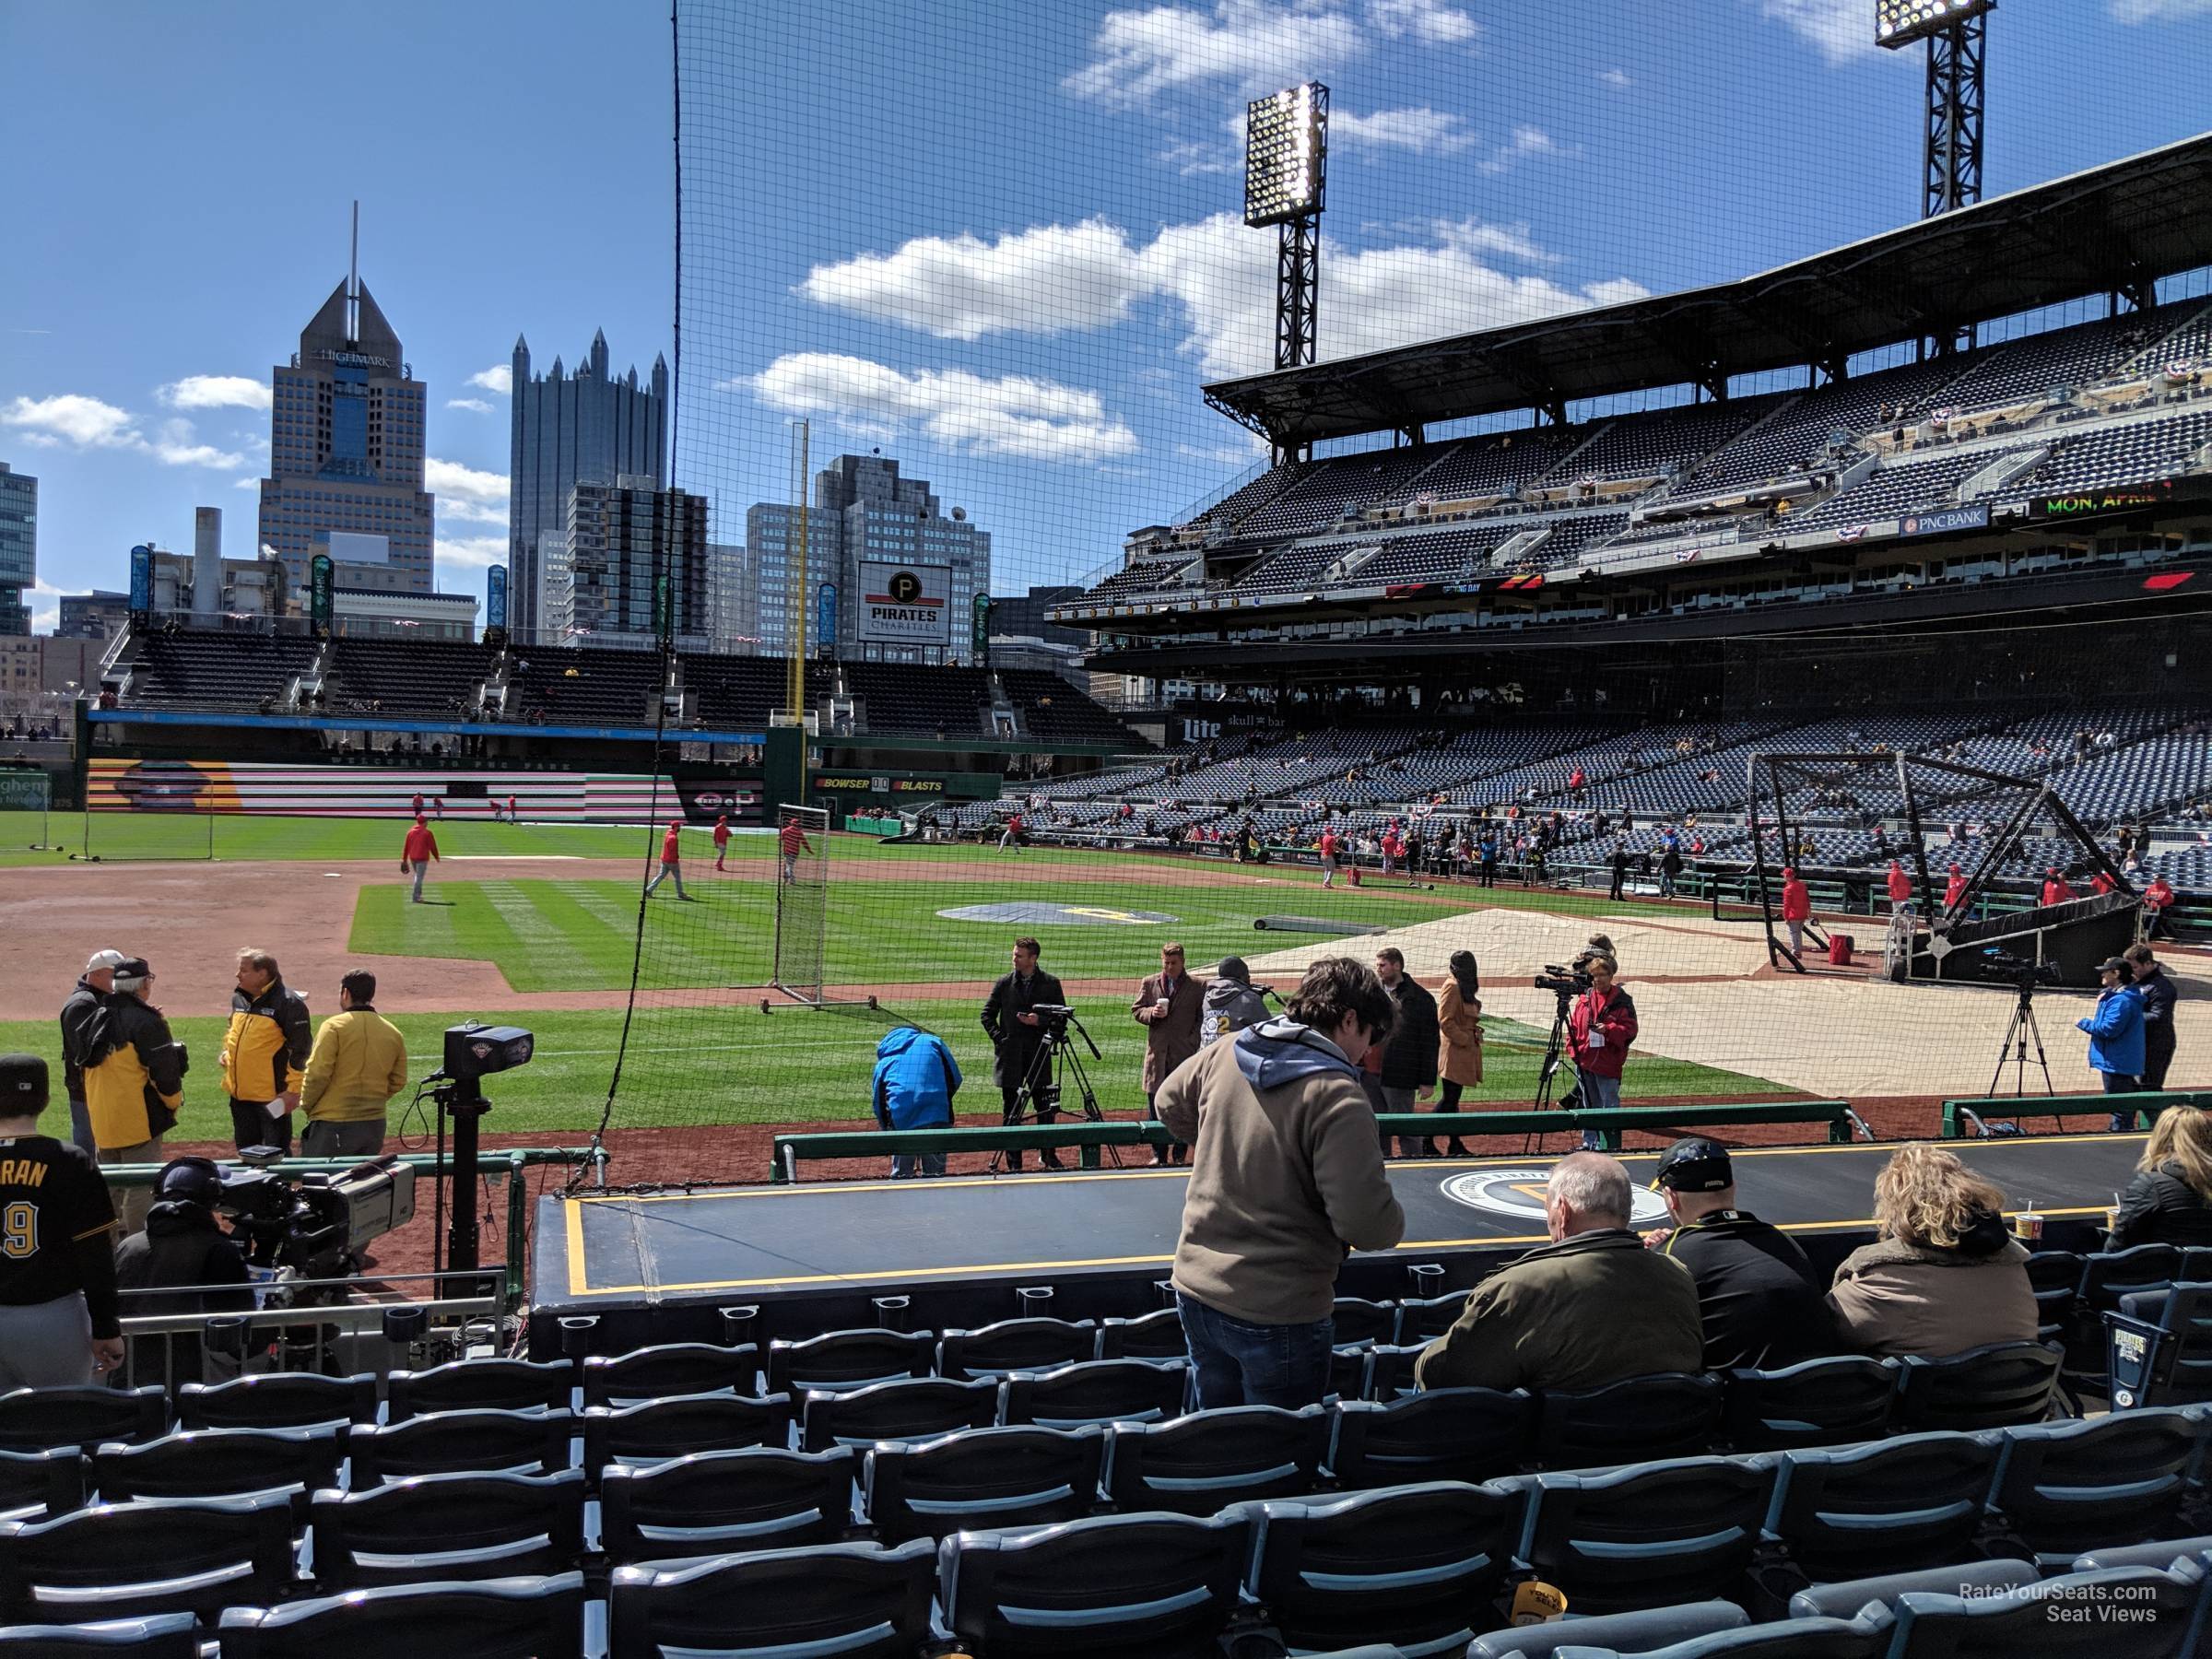 ✓ Elegant Pnc Park Seating Chart with seat numbers